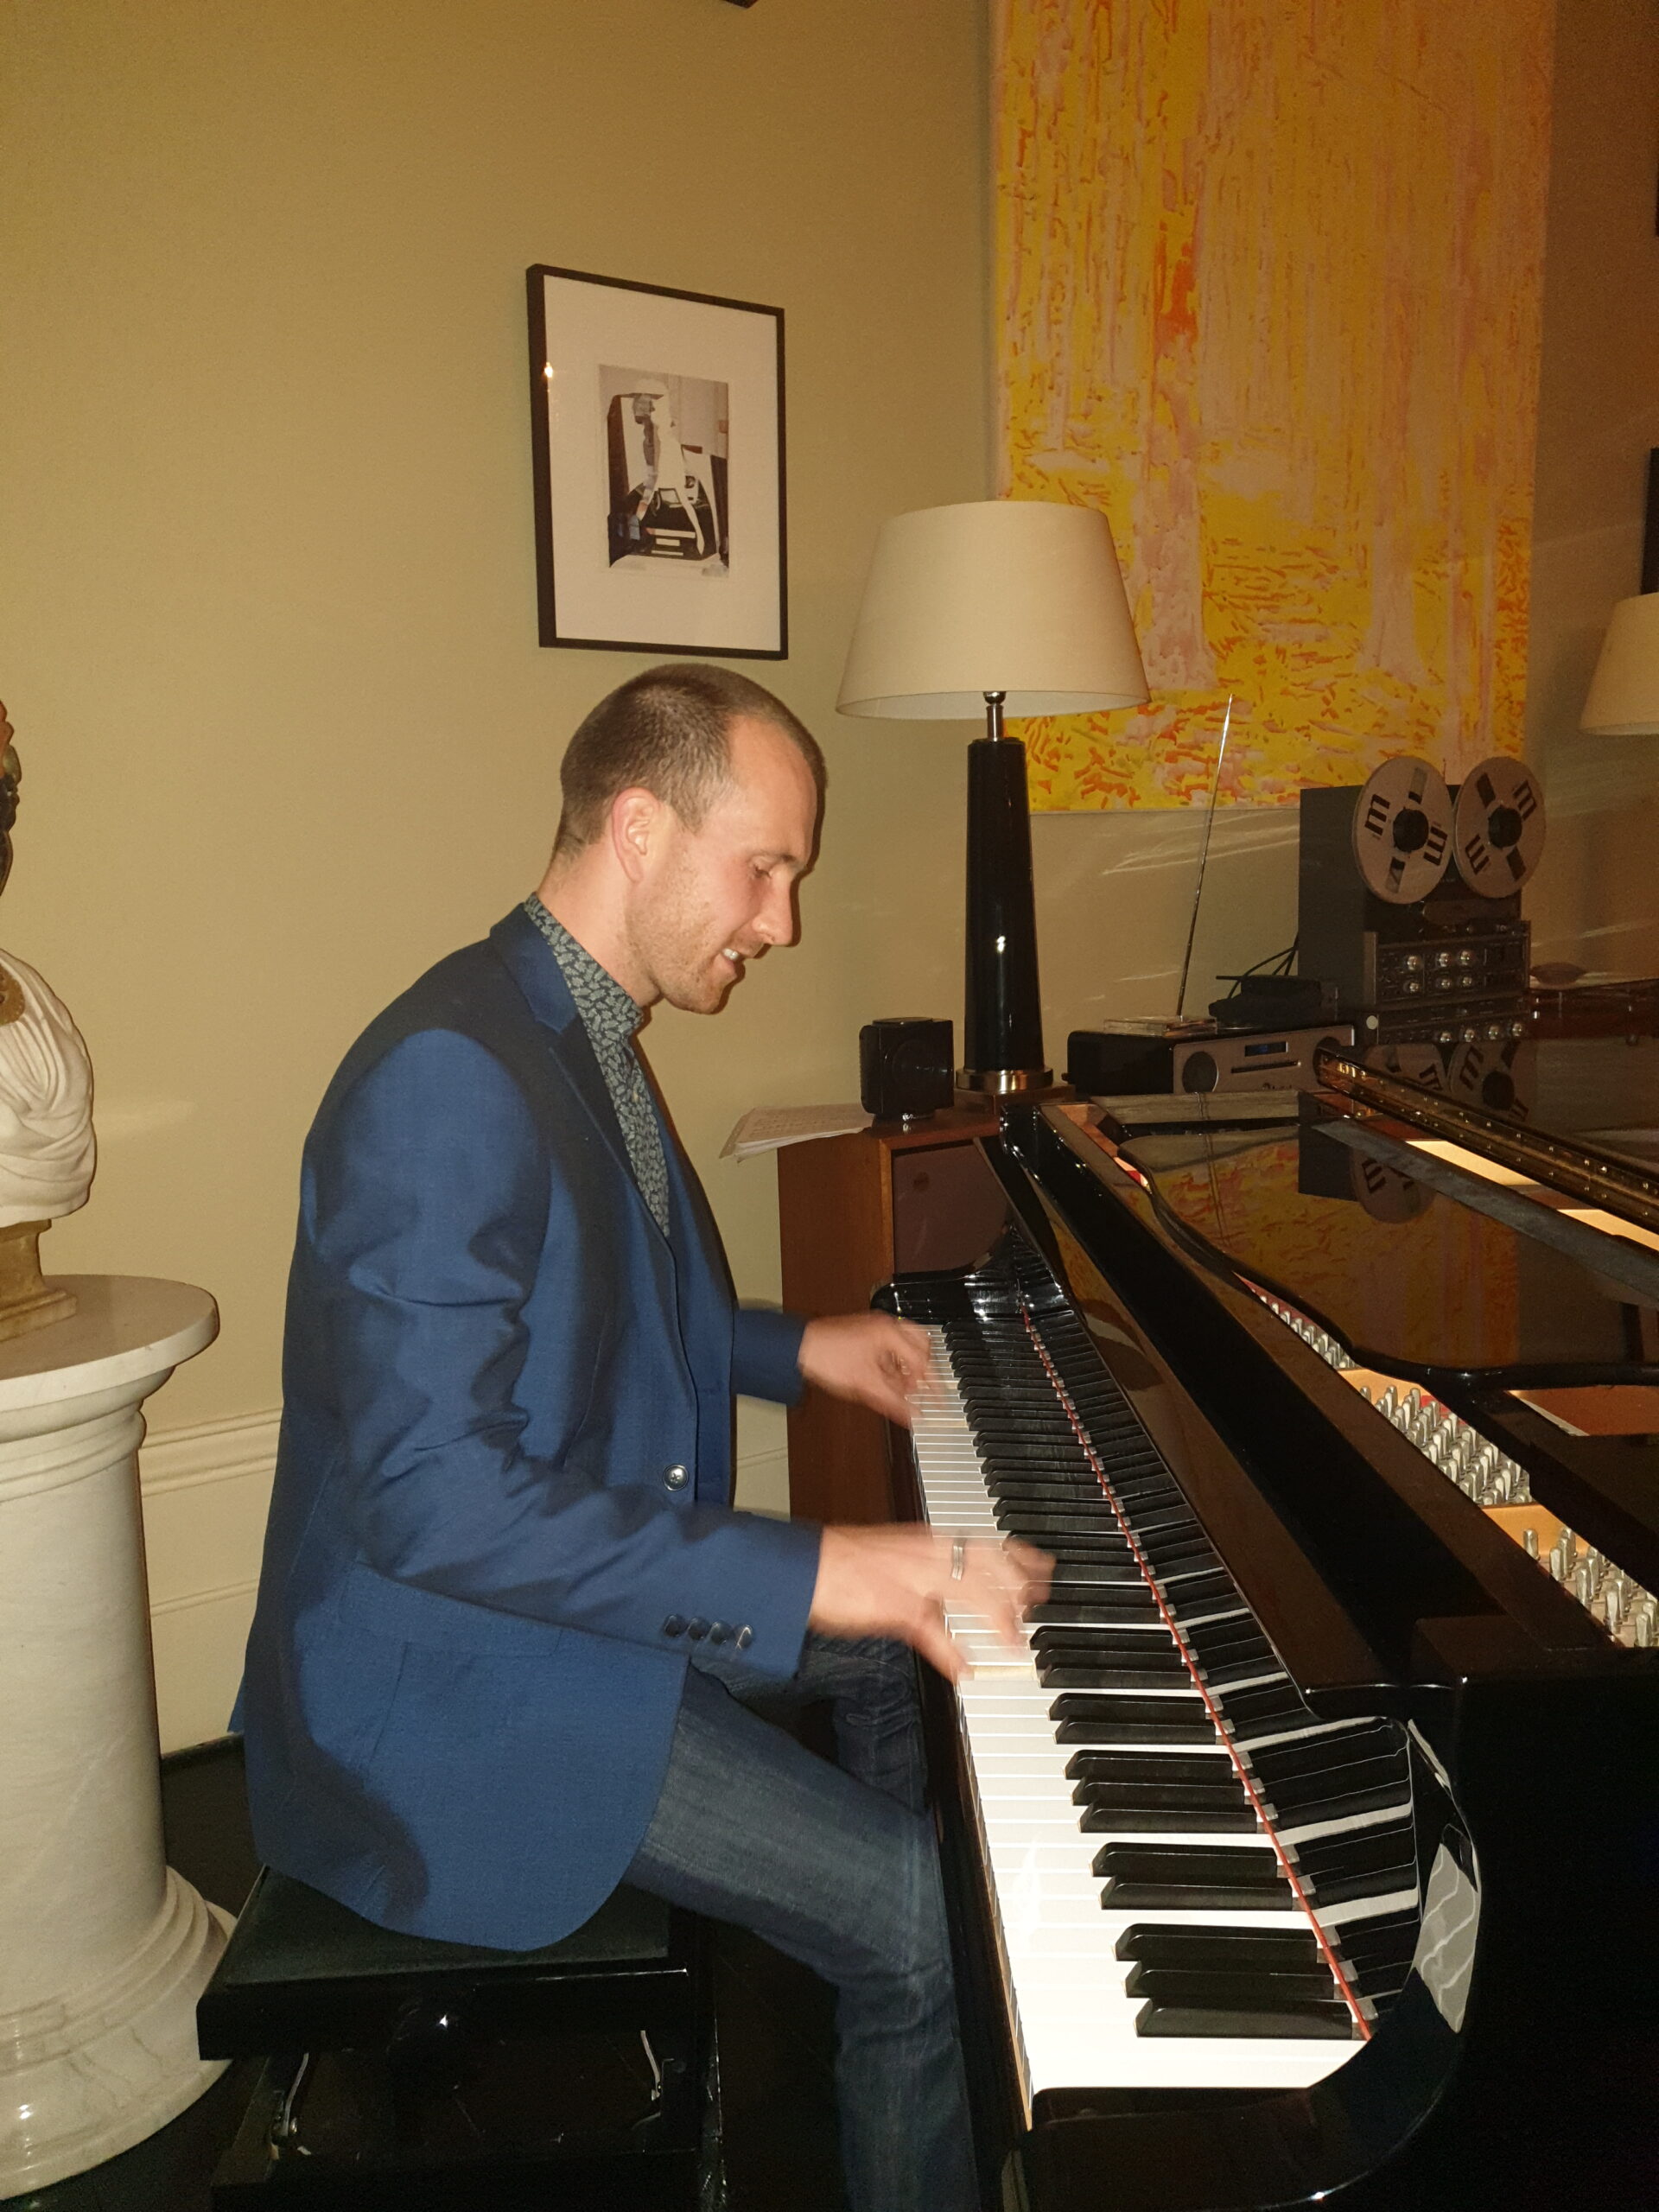 Joe Kenny playing baby grand piano In Tankardstown House Co Meath